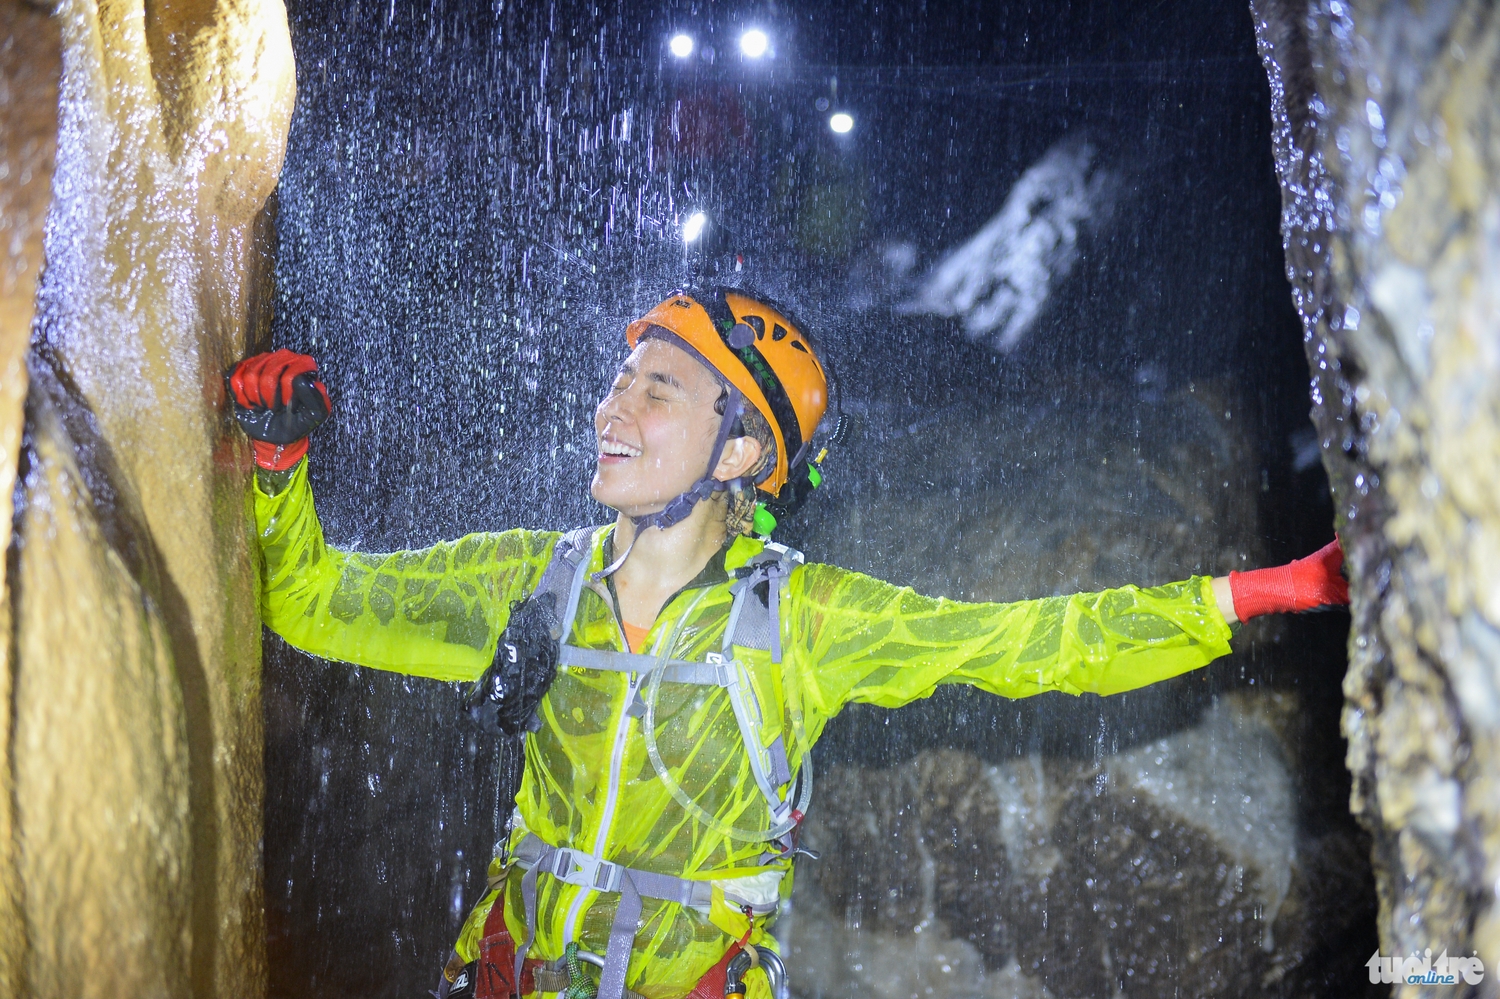 Beauty queen Duong Truong Thien Ly enjoys cool water in the cave.